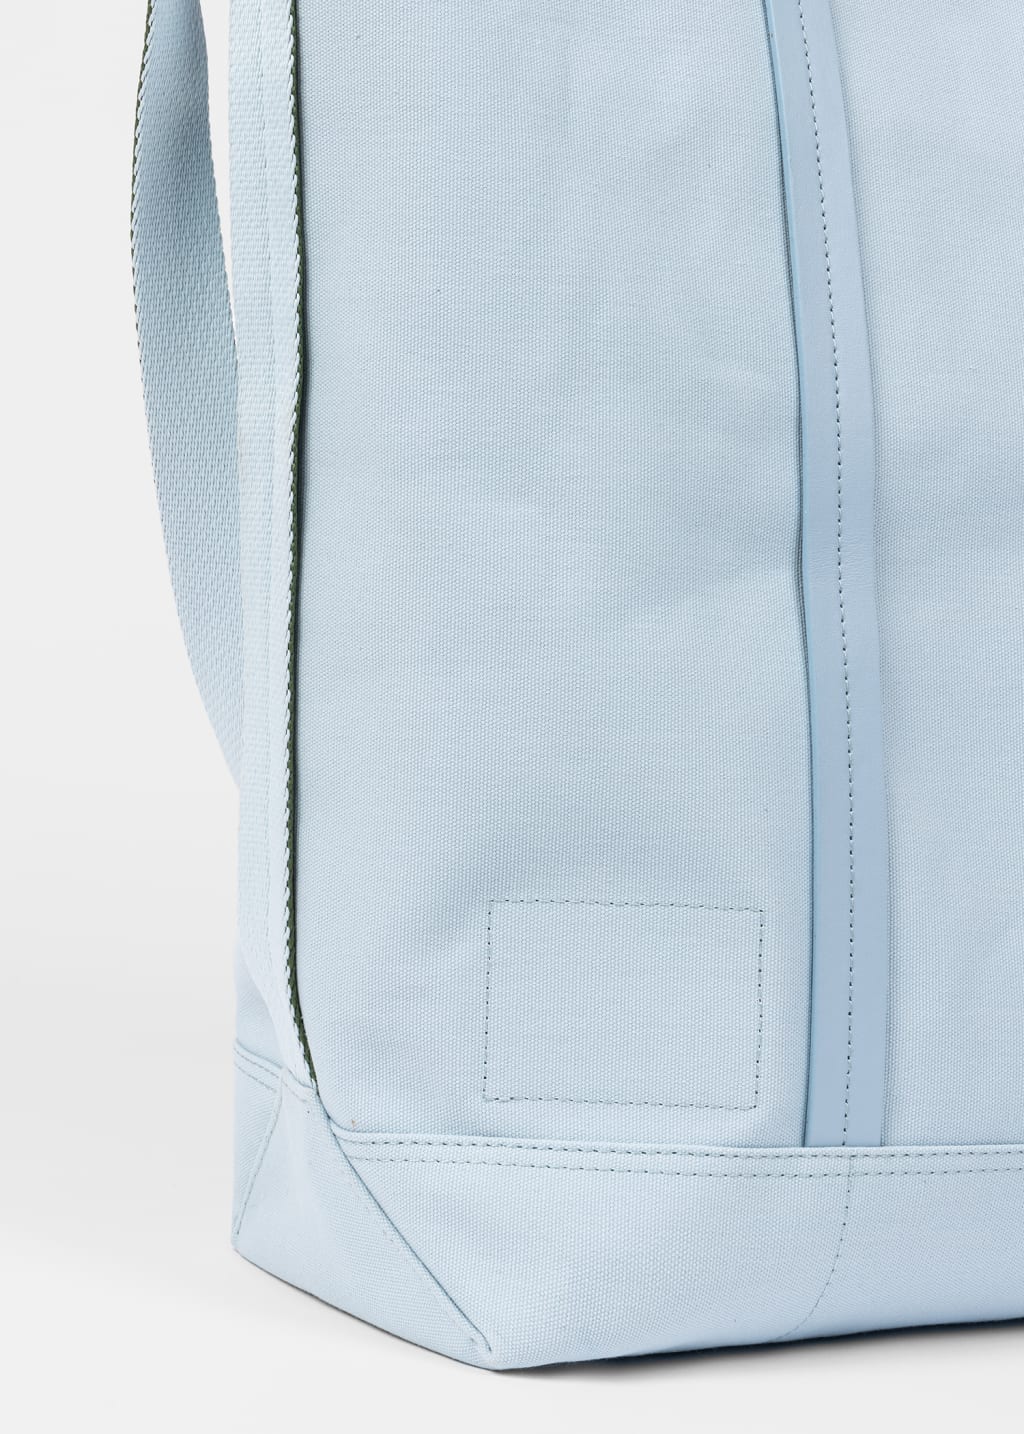 Detail View - Sky Blue Canvas Reversible Tote Bag With Shoulder Strap Paul Smith